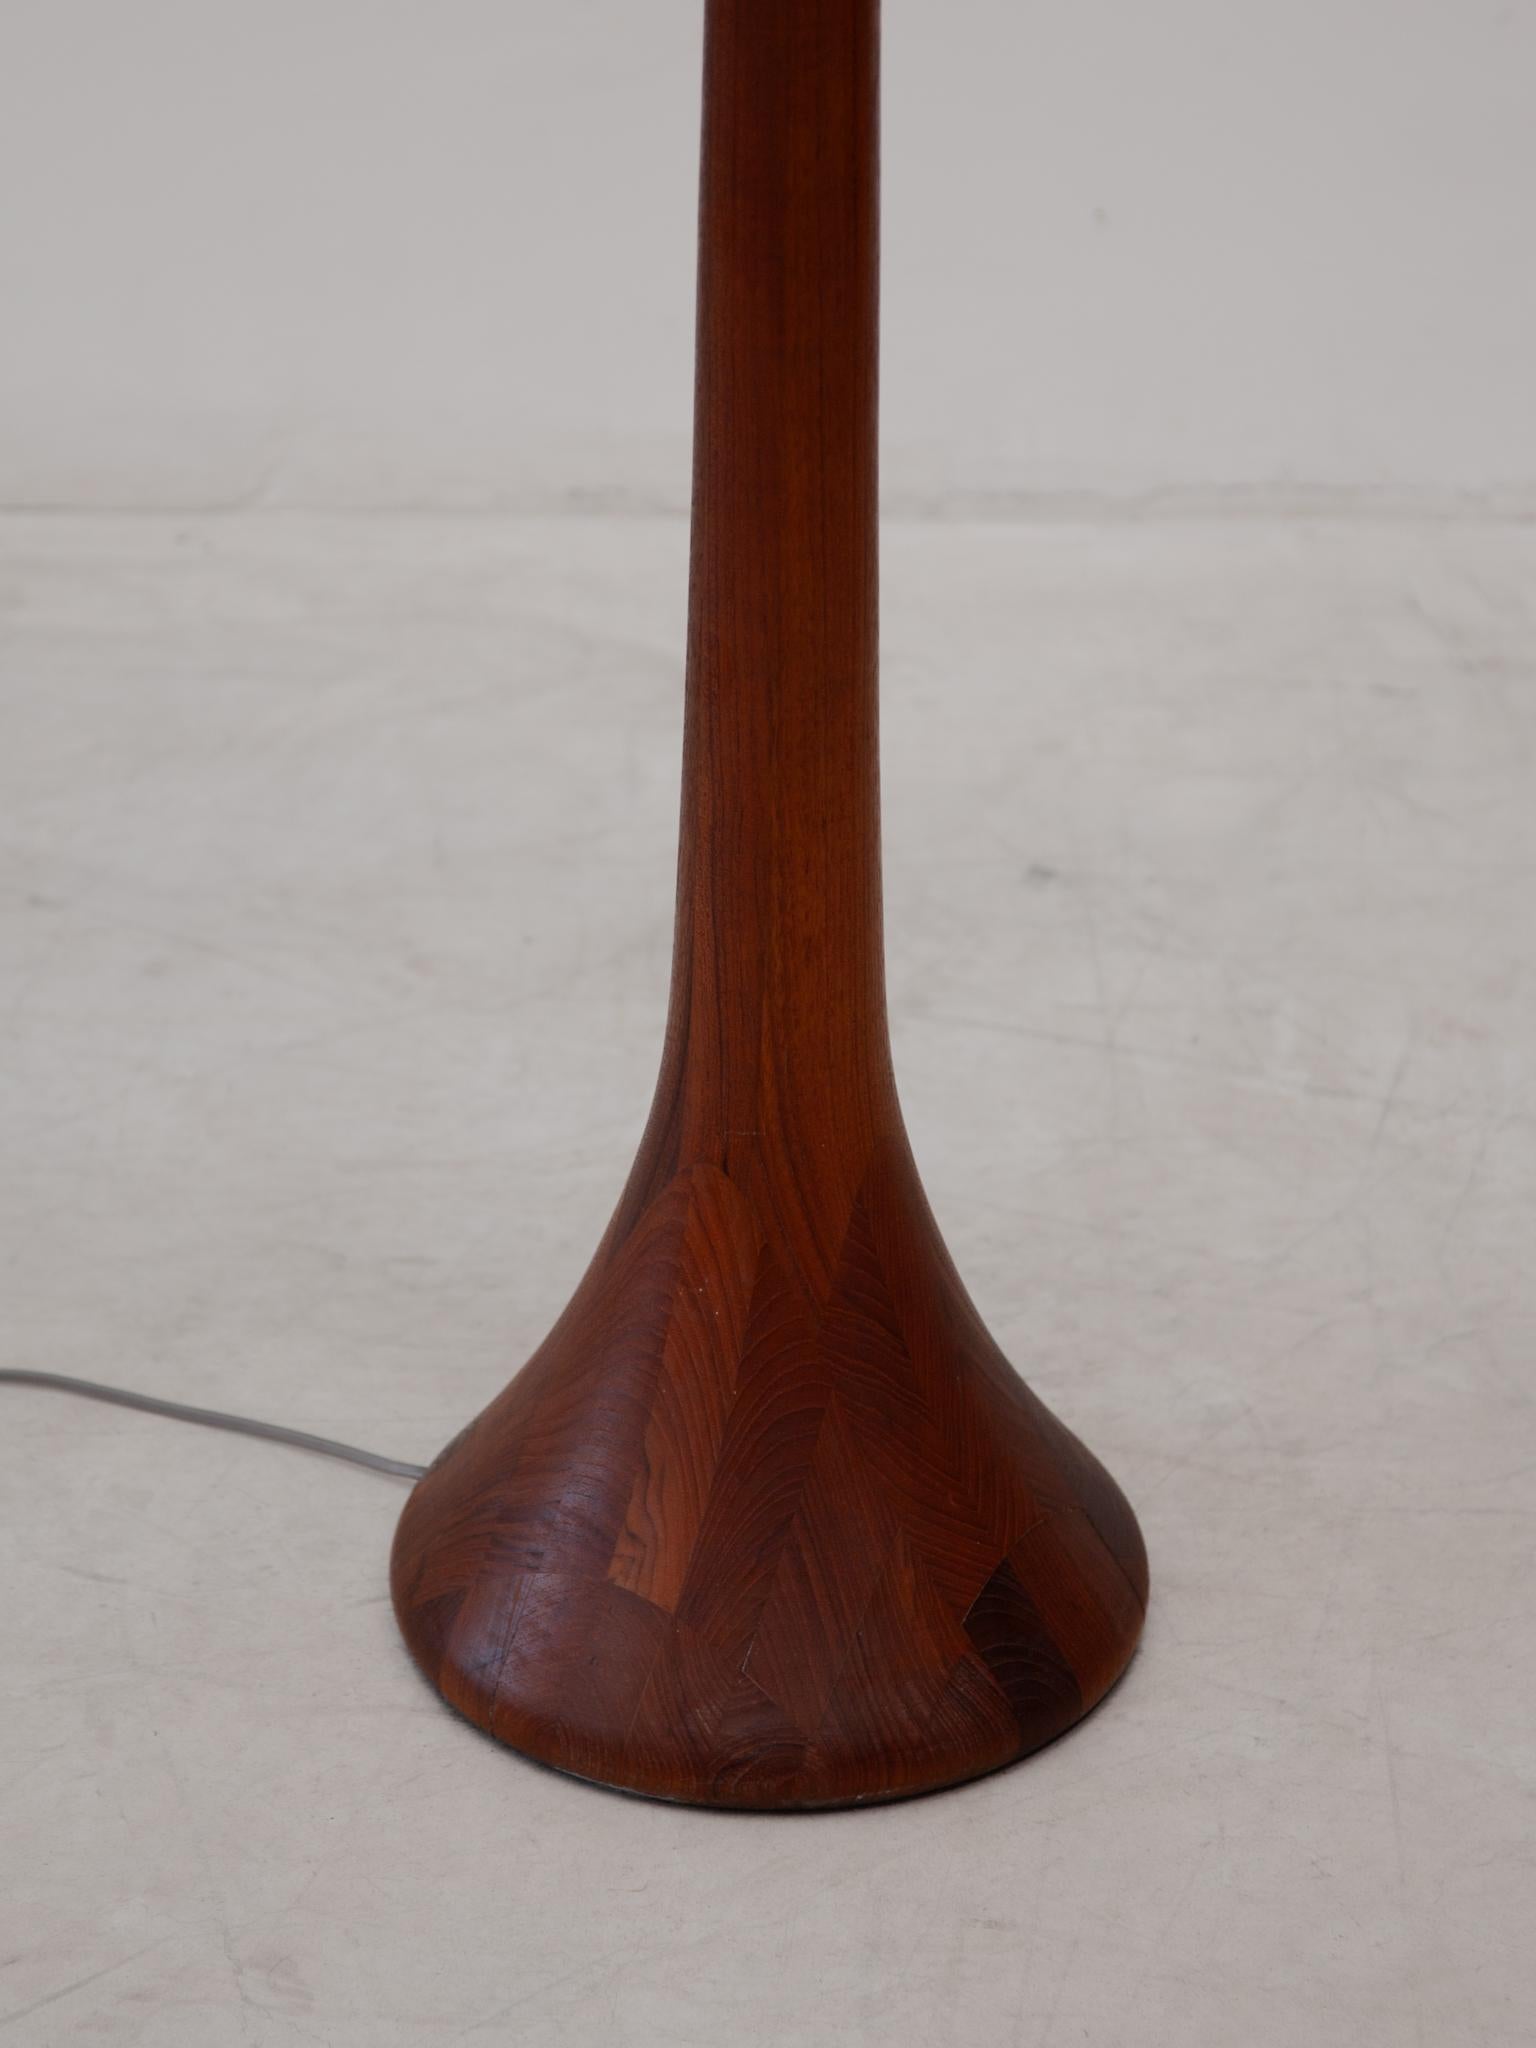 Hand-Crafted Domus Made in Denmark Solid Teak Floor lamp, 1960s For Sale